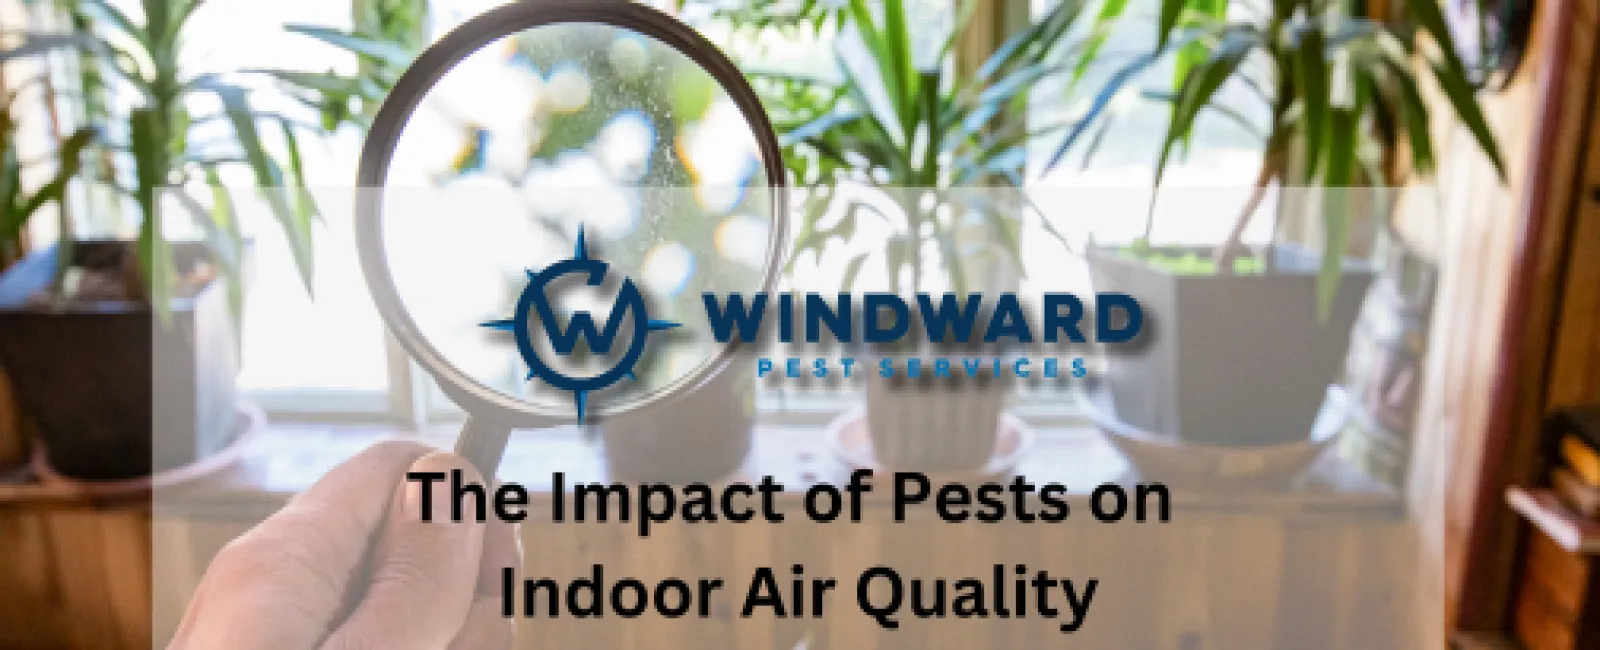 The Impact of Pests on Indoor Air Quality